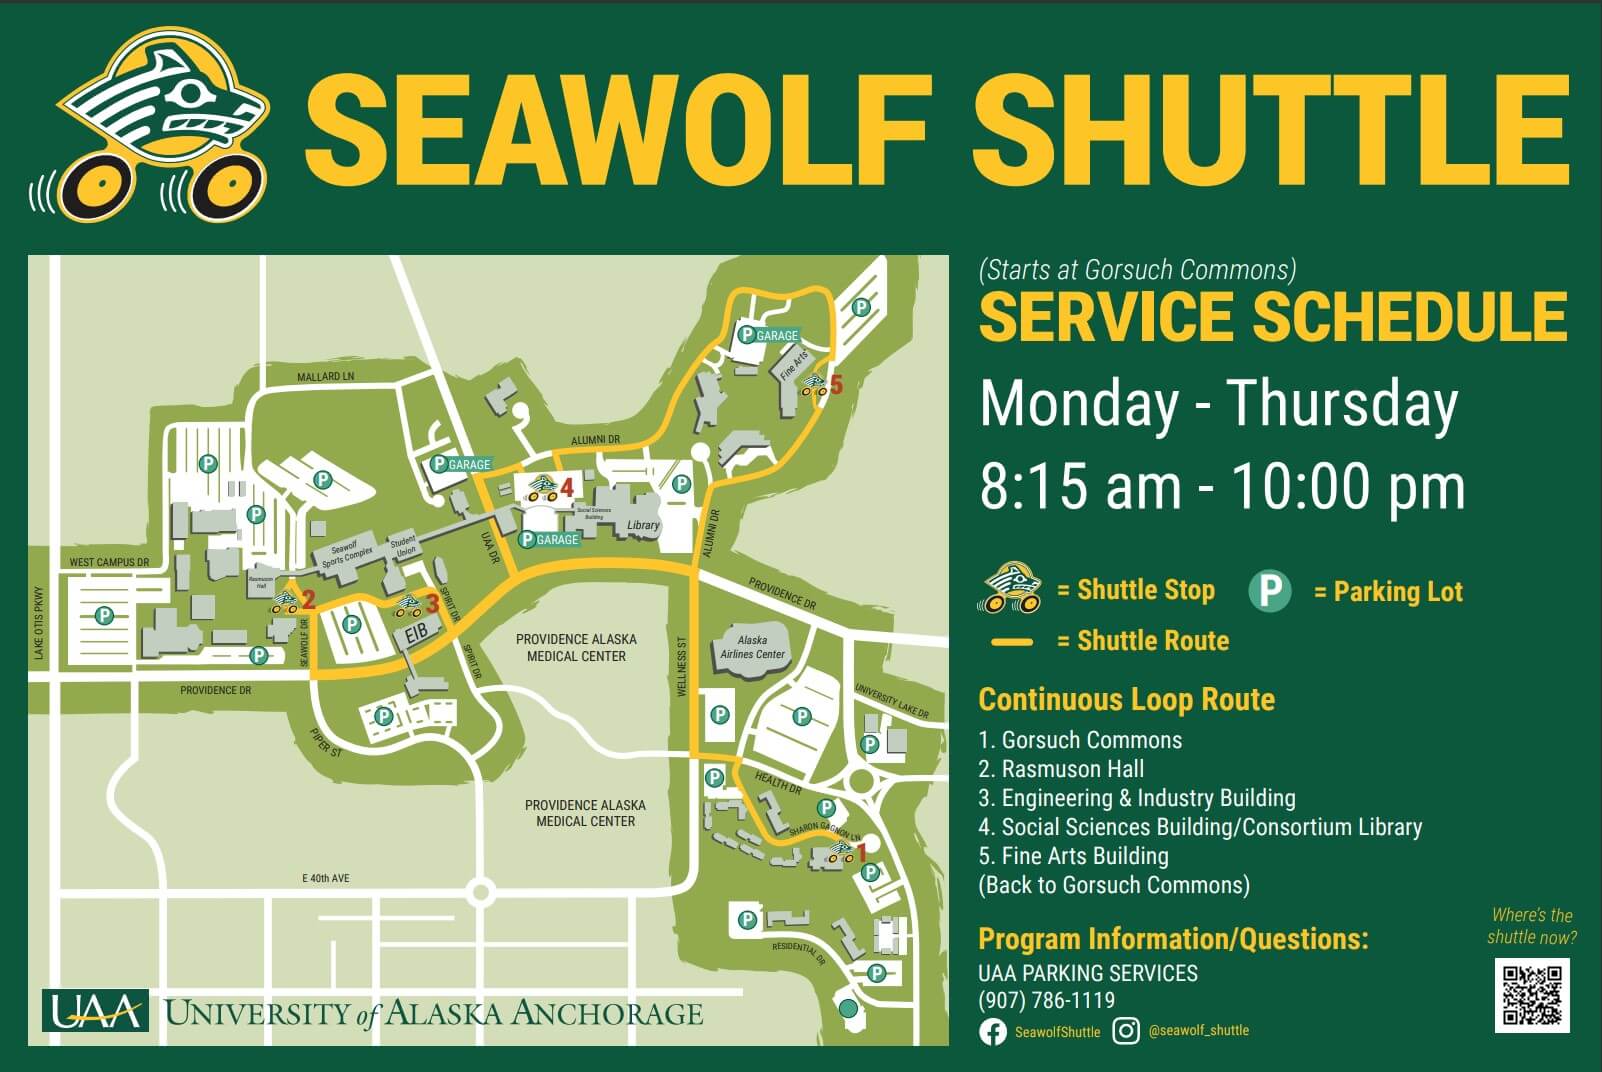 seawolf shuttle starts at gorsuch commons. service schedule monday-thursday 8:15am-10:00pm shuttle stop shuttle route parking lot. continuous loop 1. gorsuch commons 2. rasmussen hall 3. engineering and industry building 4. social sciences building/consortium library 5. fine arts building back to gorsuch commons. program information/questions uaa parking services (907) 786-1119